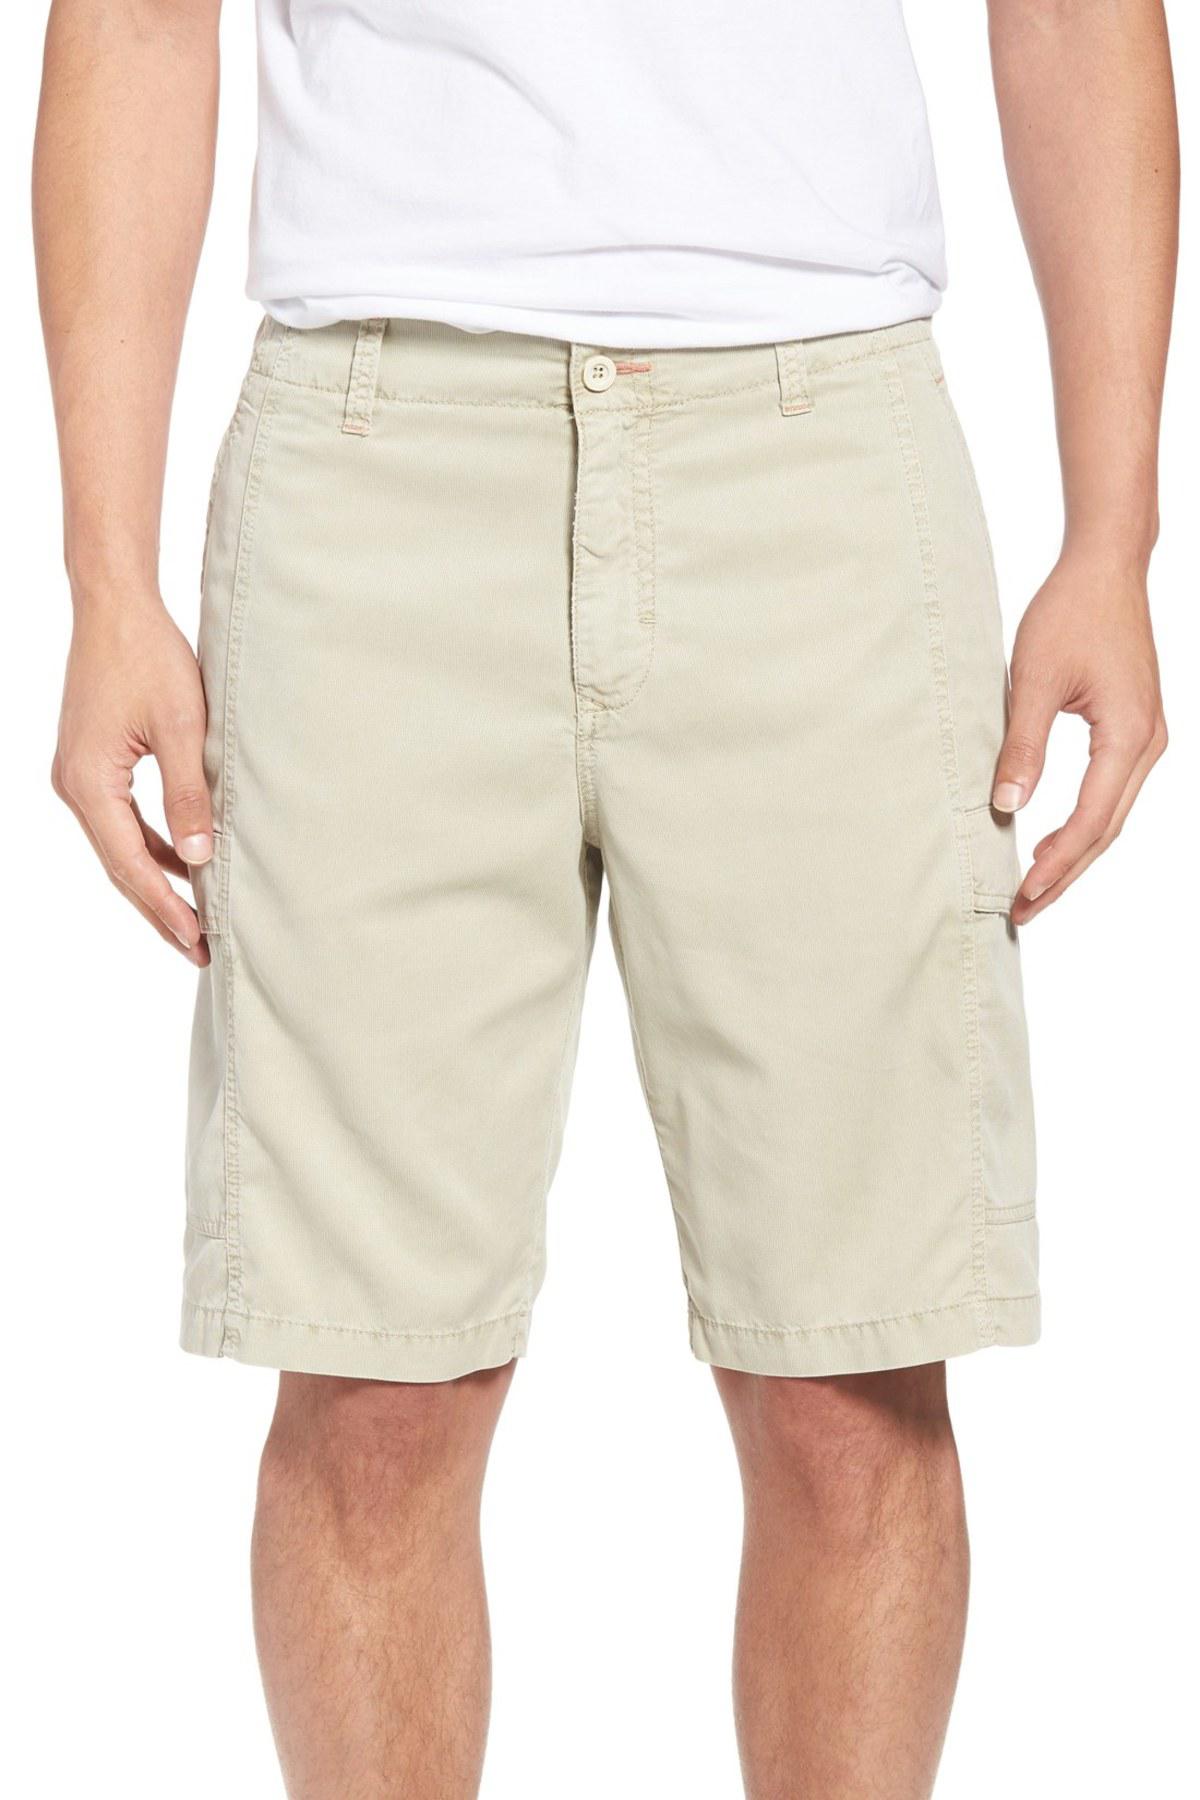 Tommy Bahama 'key Grip' Relaxed Fit Cargo Shorts in Natural for Men - Lyst